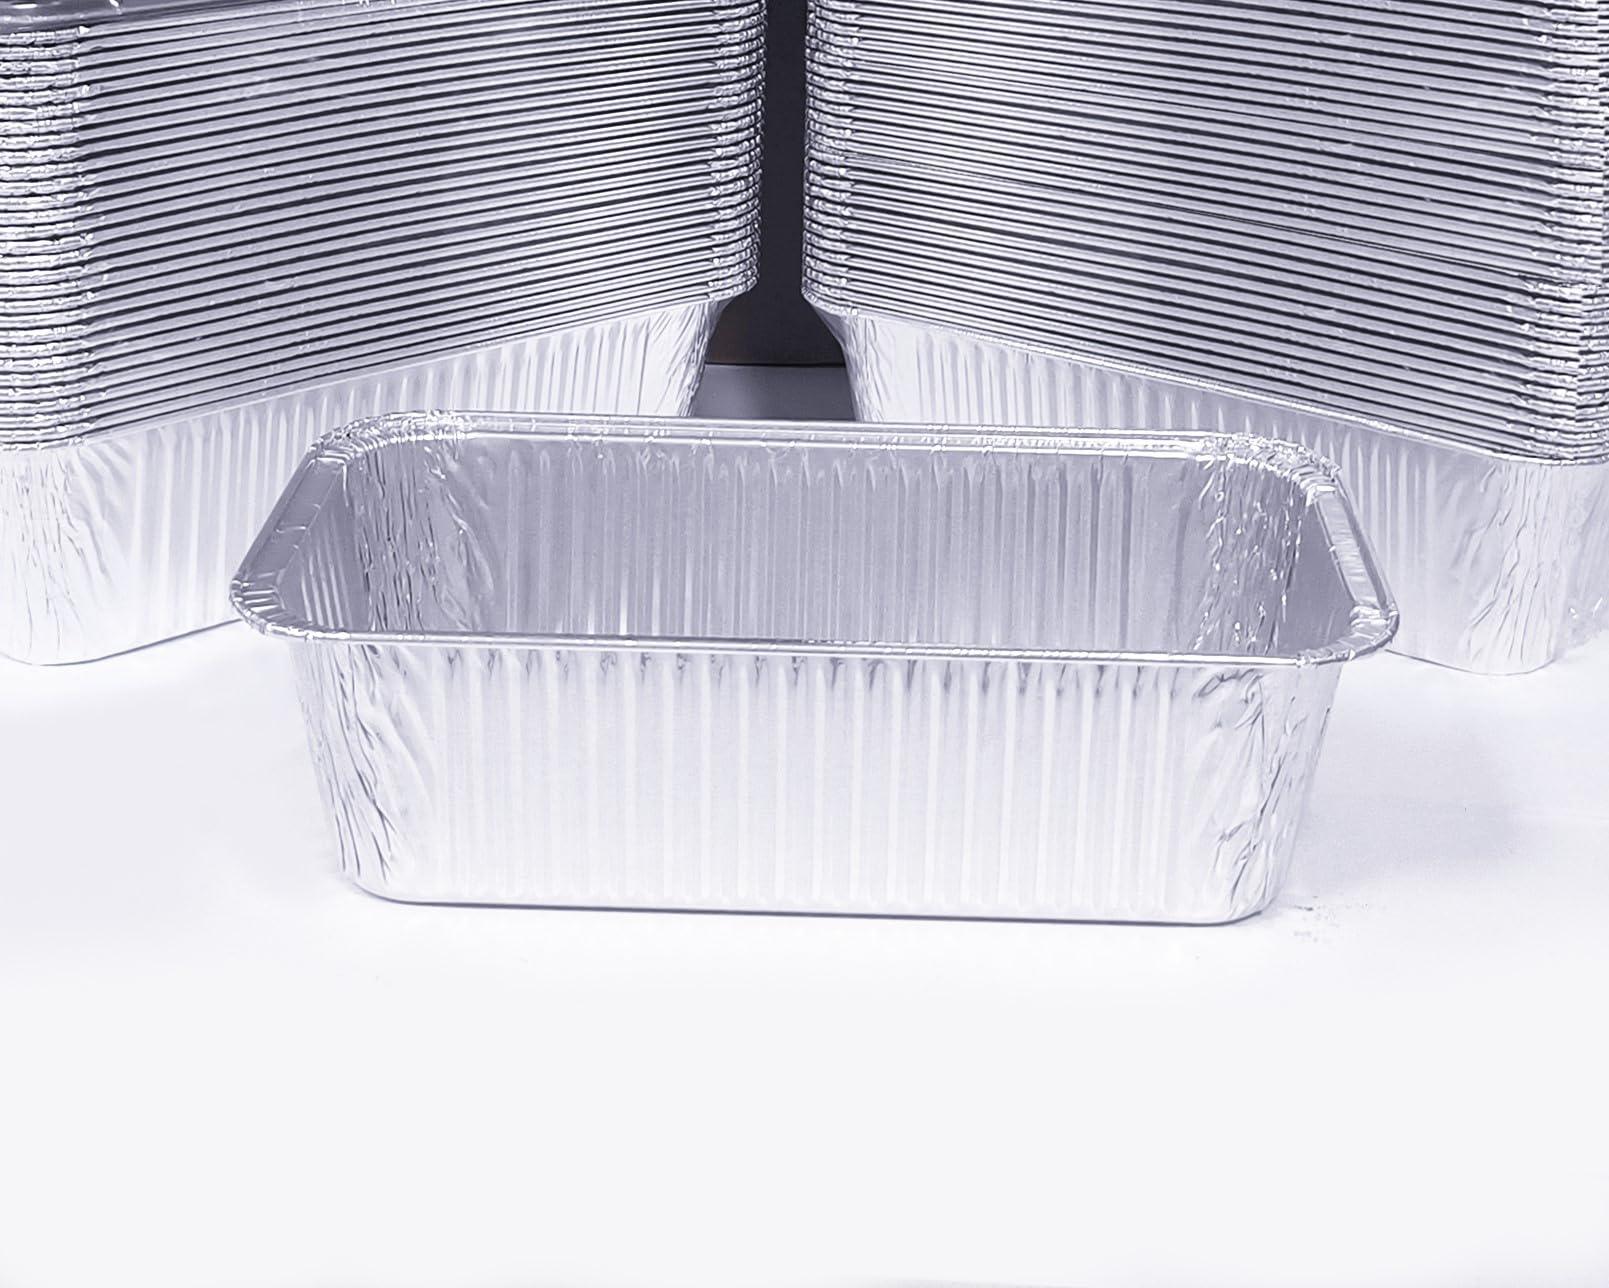 Disposable 2 lb Foil Loaf Pans | 8x4" Bread Pans, 50 Pack, Food Storage Containers, Take Out Boxes, Perfect for Baking Bread and Street Treats - CookCave